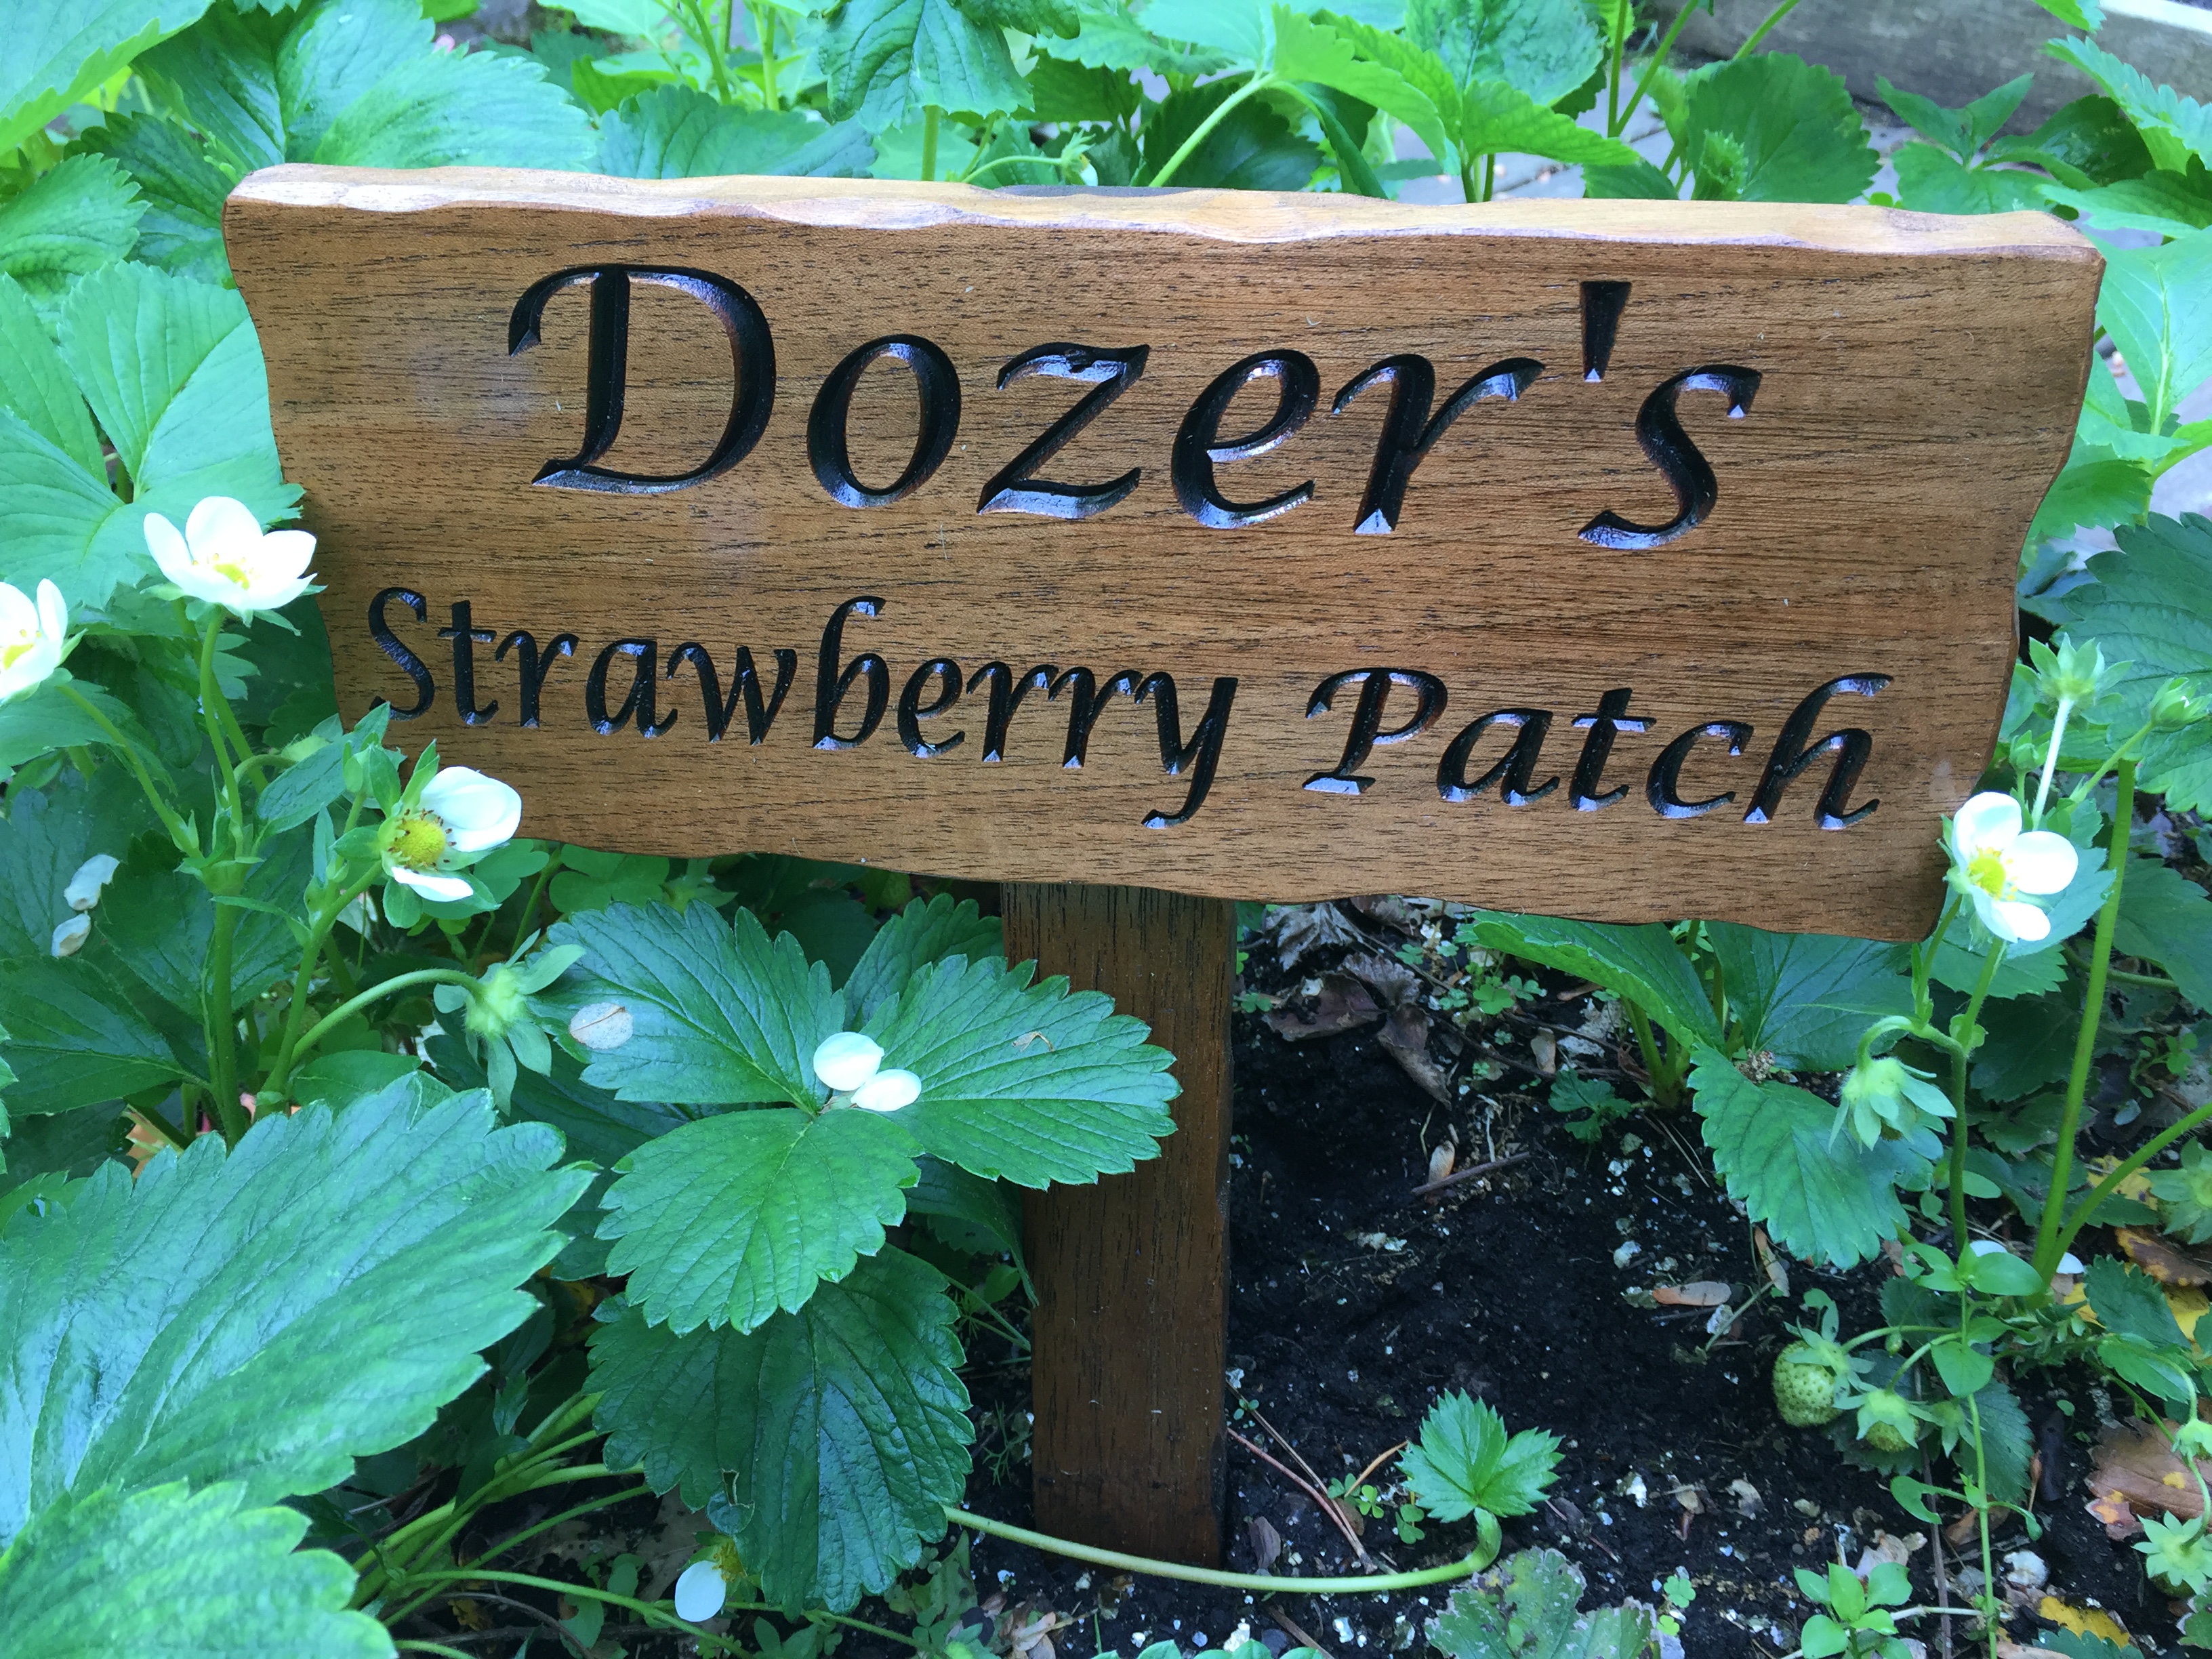 12" x 5" Garden Sign with Stake: benchmarksignsandgifts.com